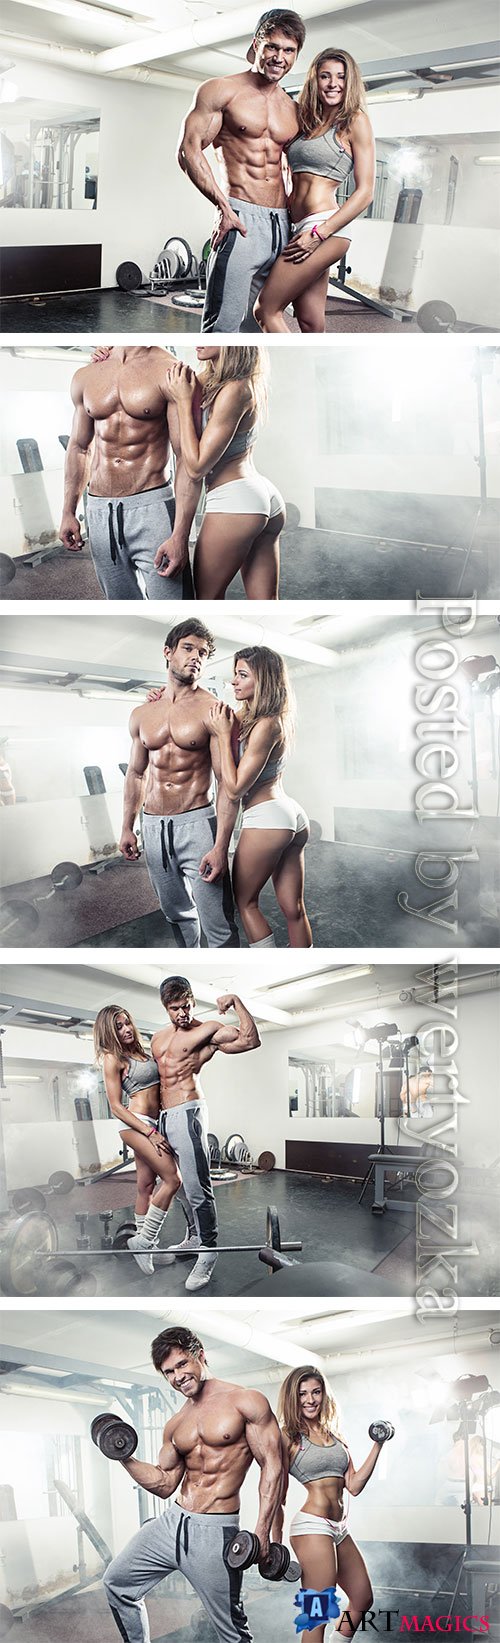 Young athletic man and girl in gym stock photo